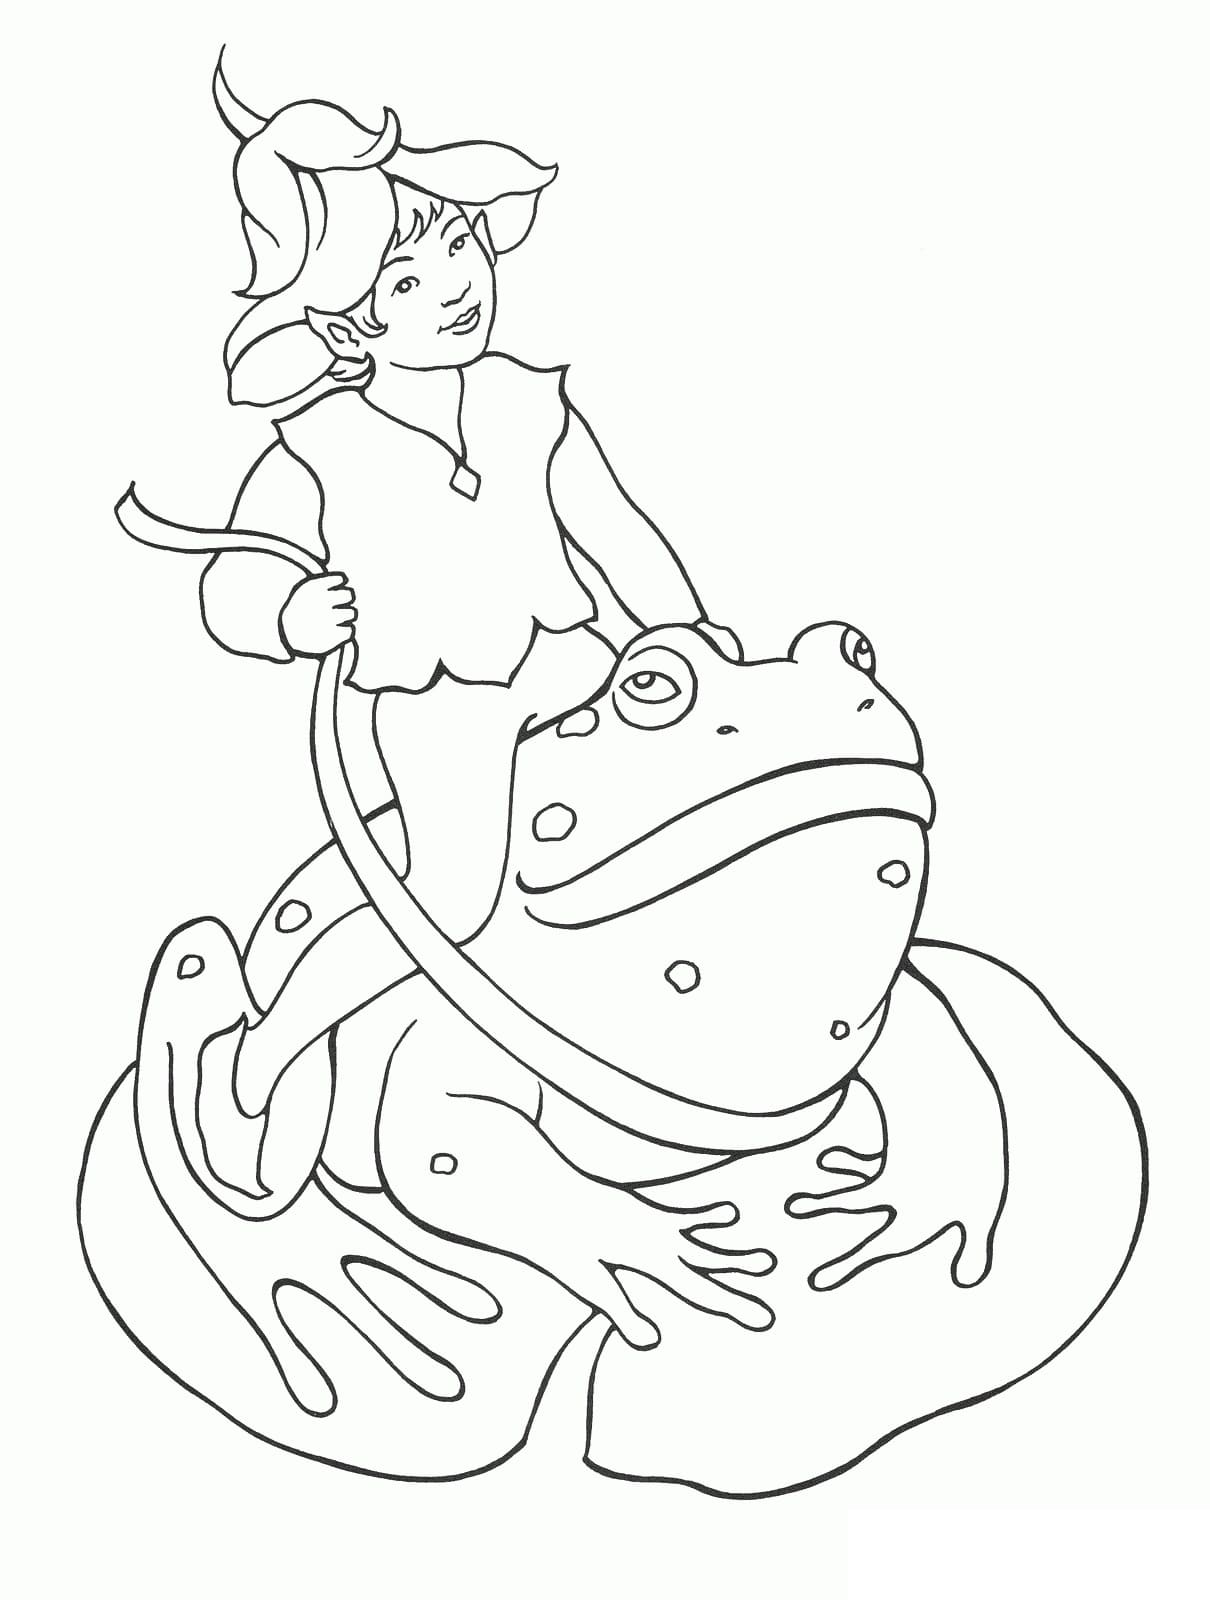 Elfe et Grenouille coloring page